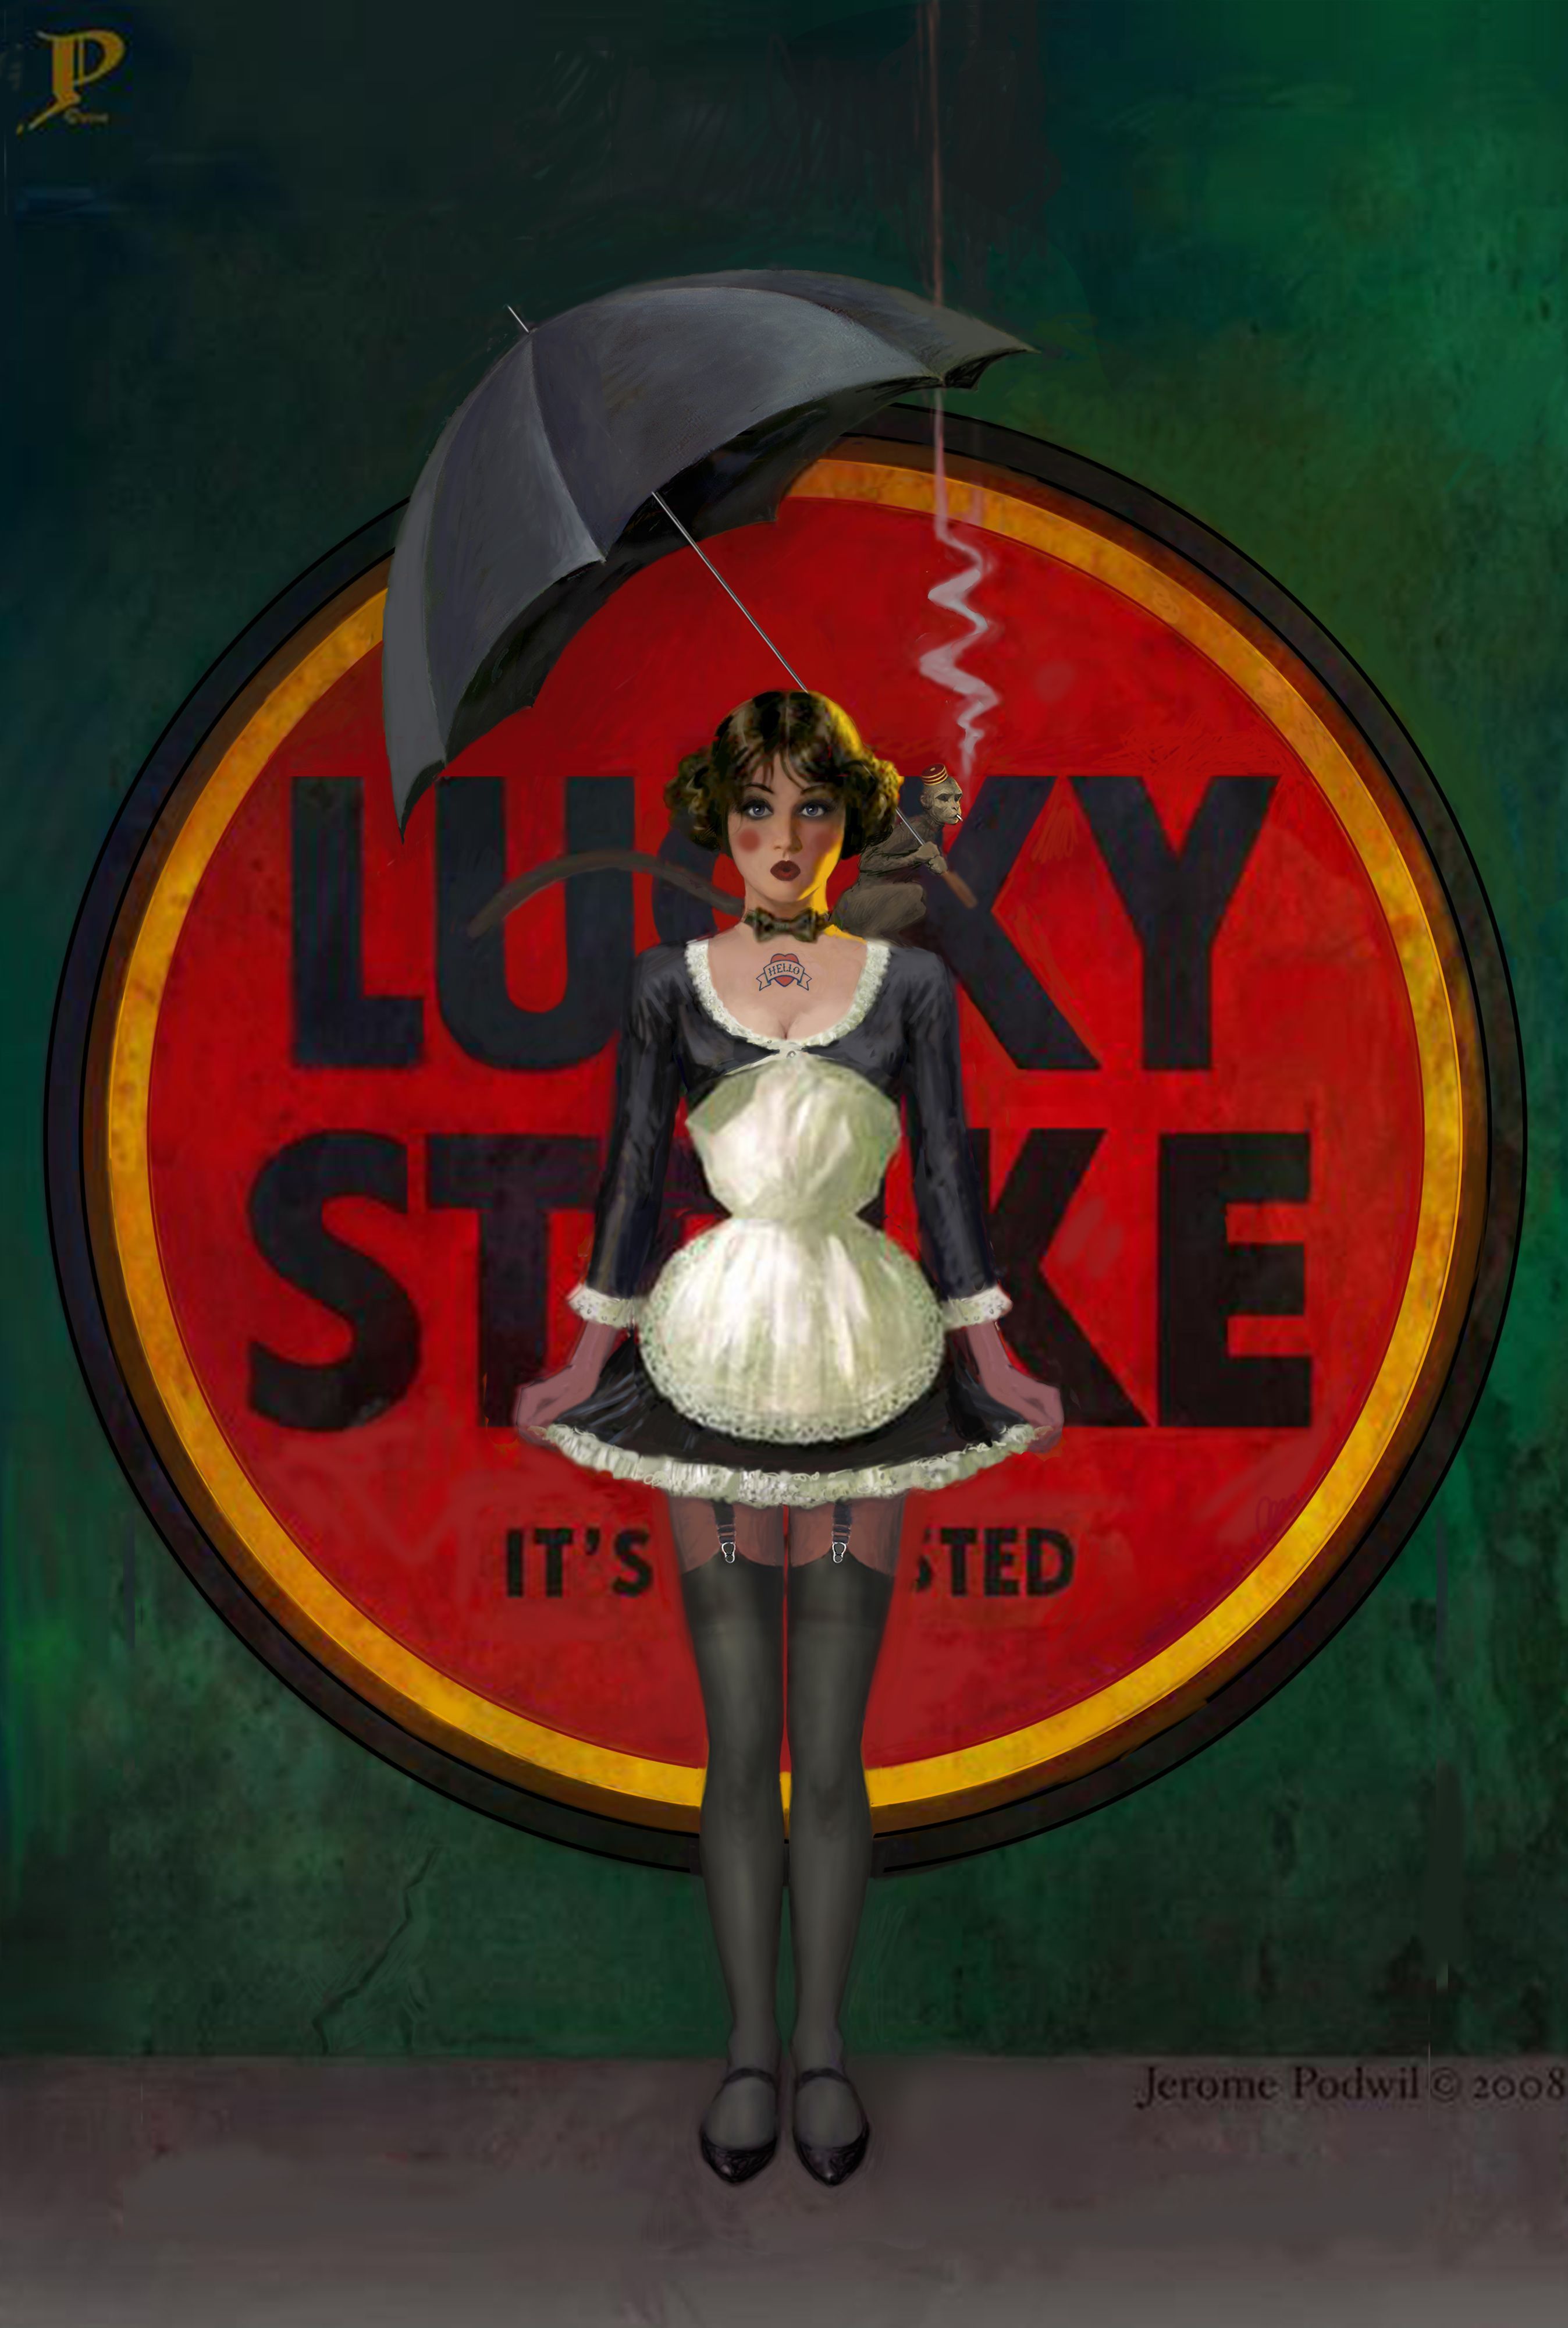 lucky strike. Retro graphic design, iPhone wallpaper vintage, Vintage posters